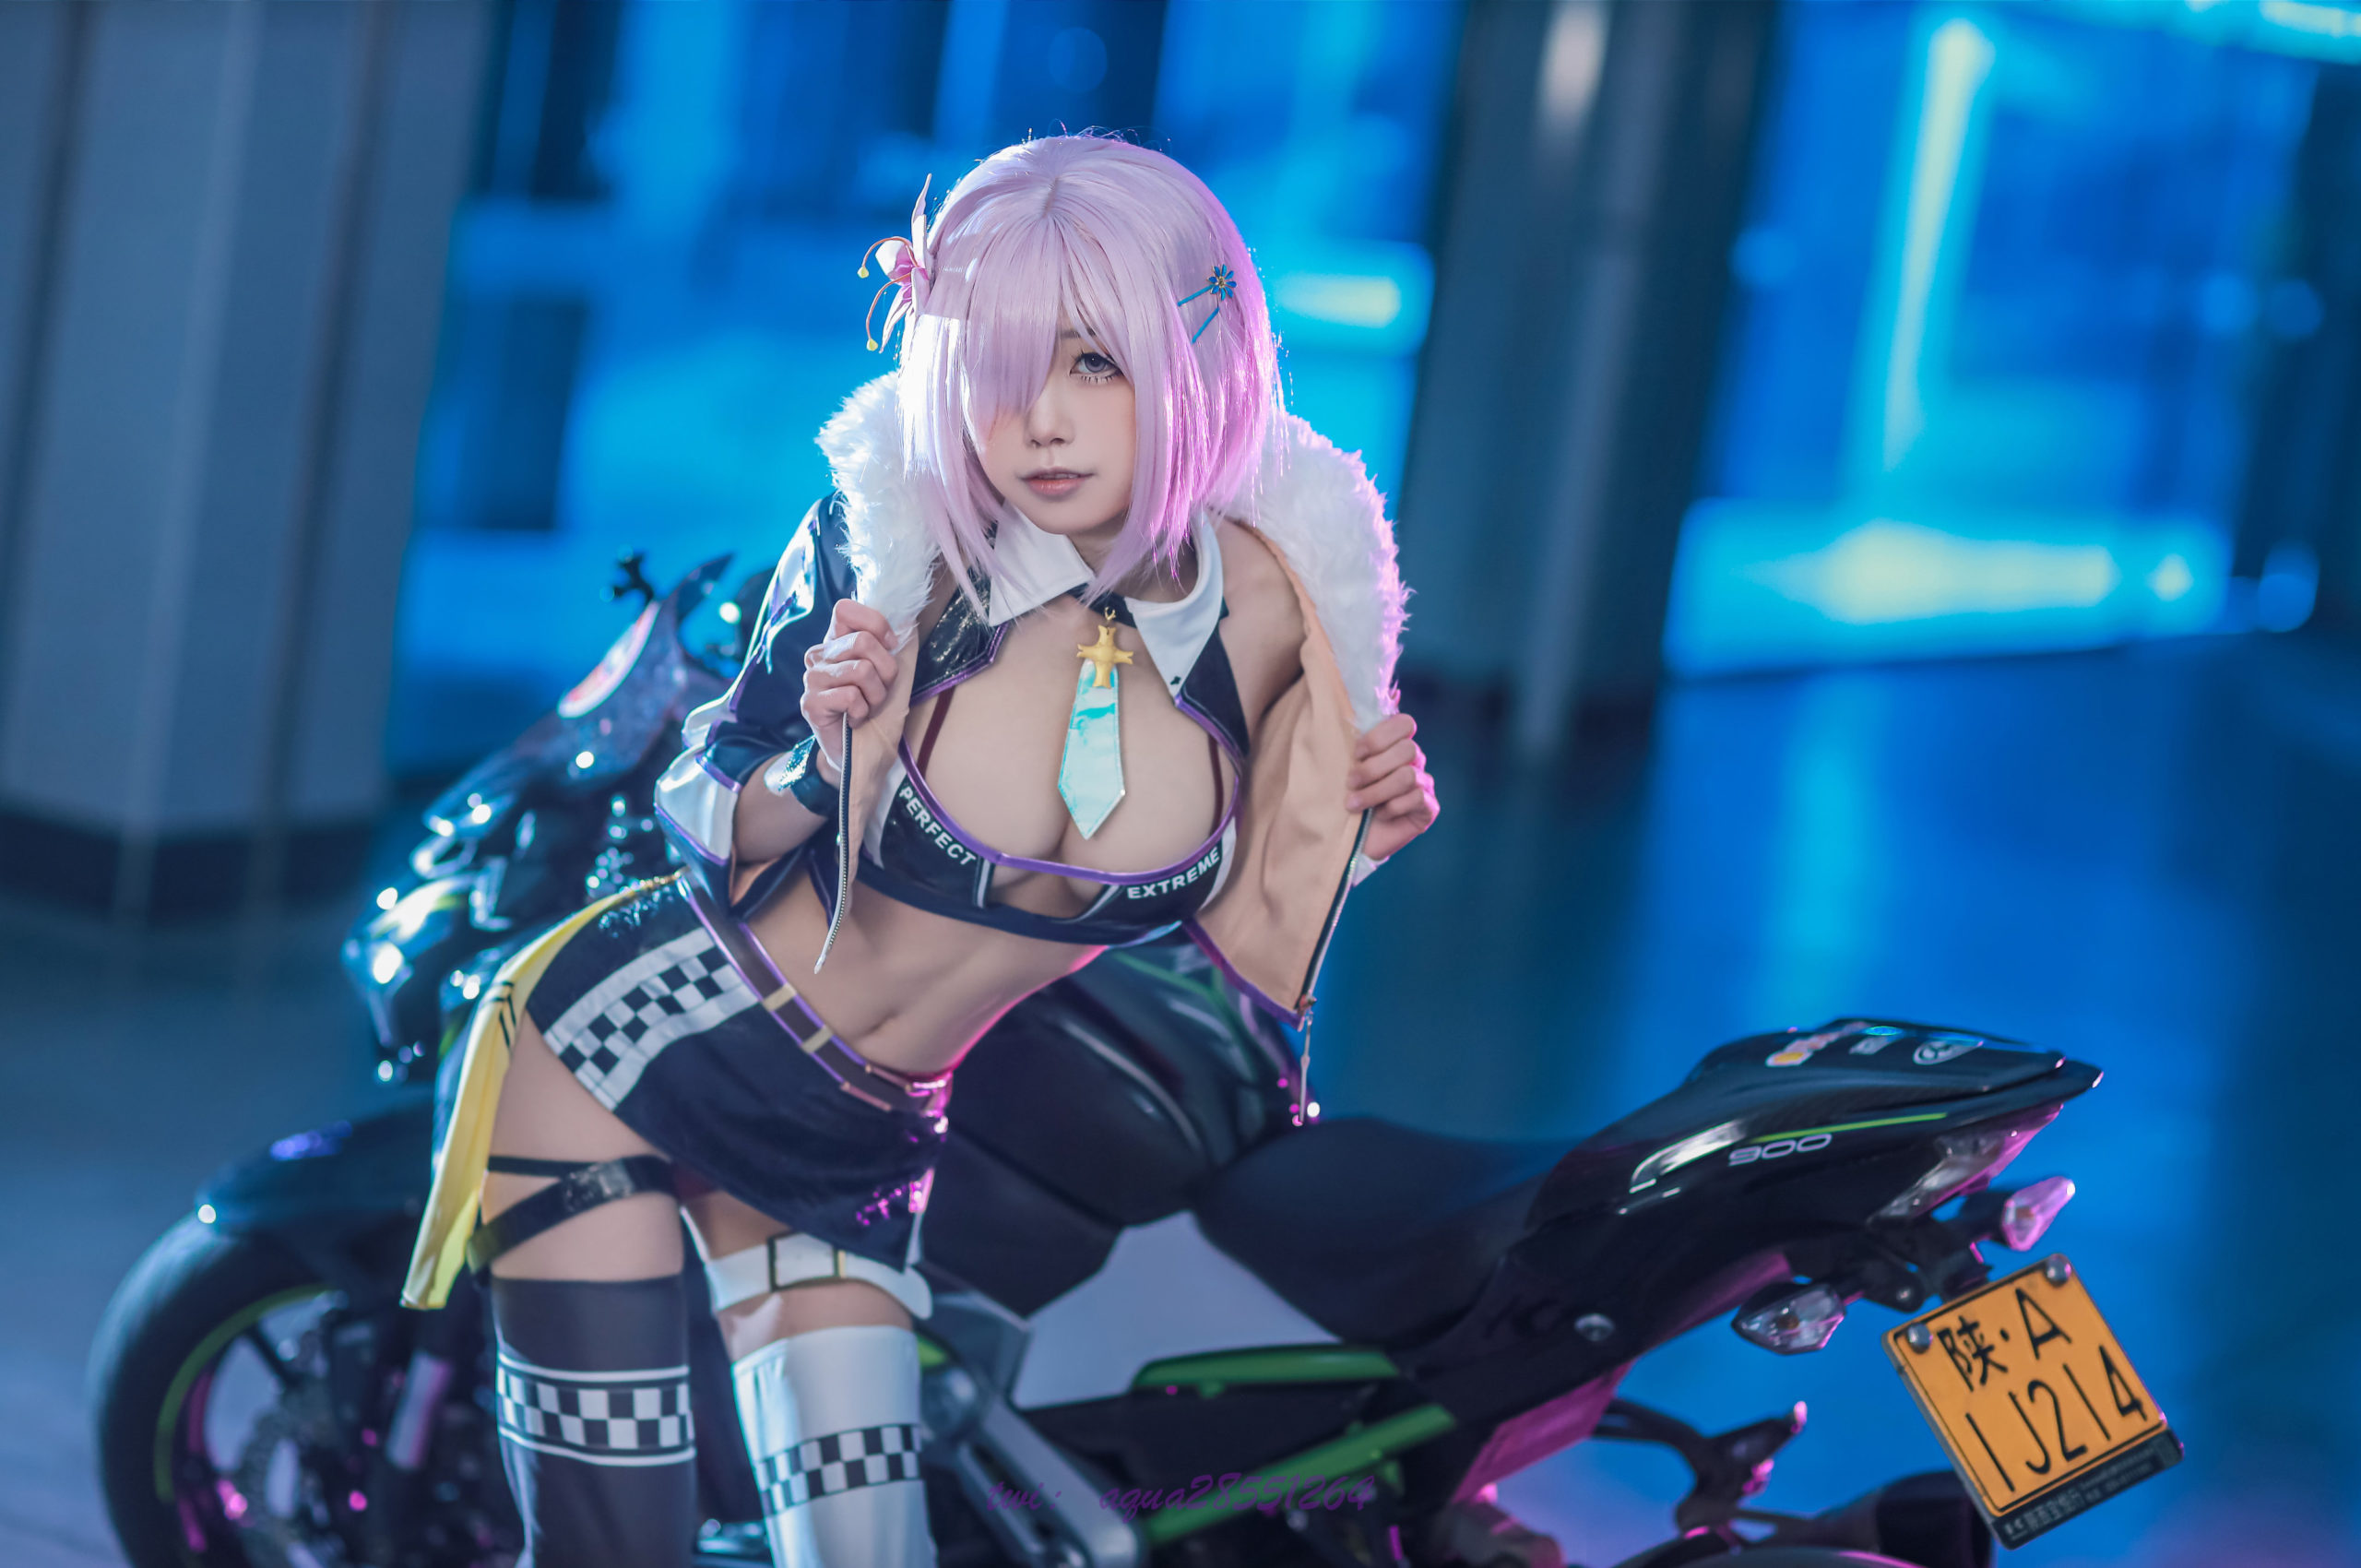 Get Your Heart Racing with These Sultry Kuroinu Cosplay Photos